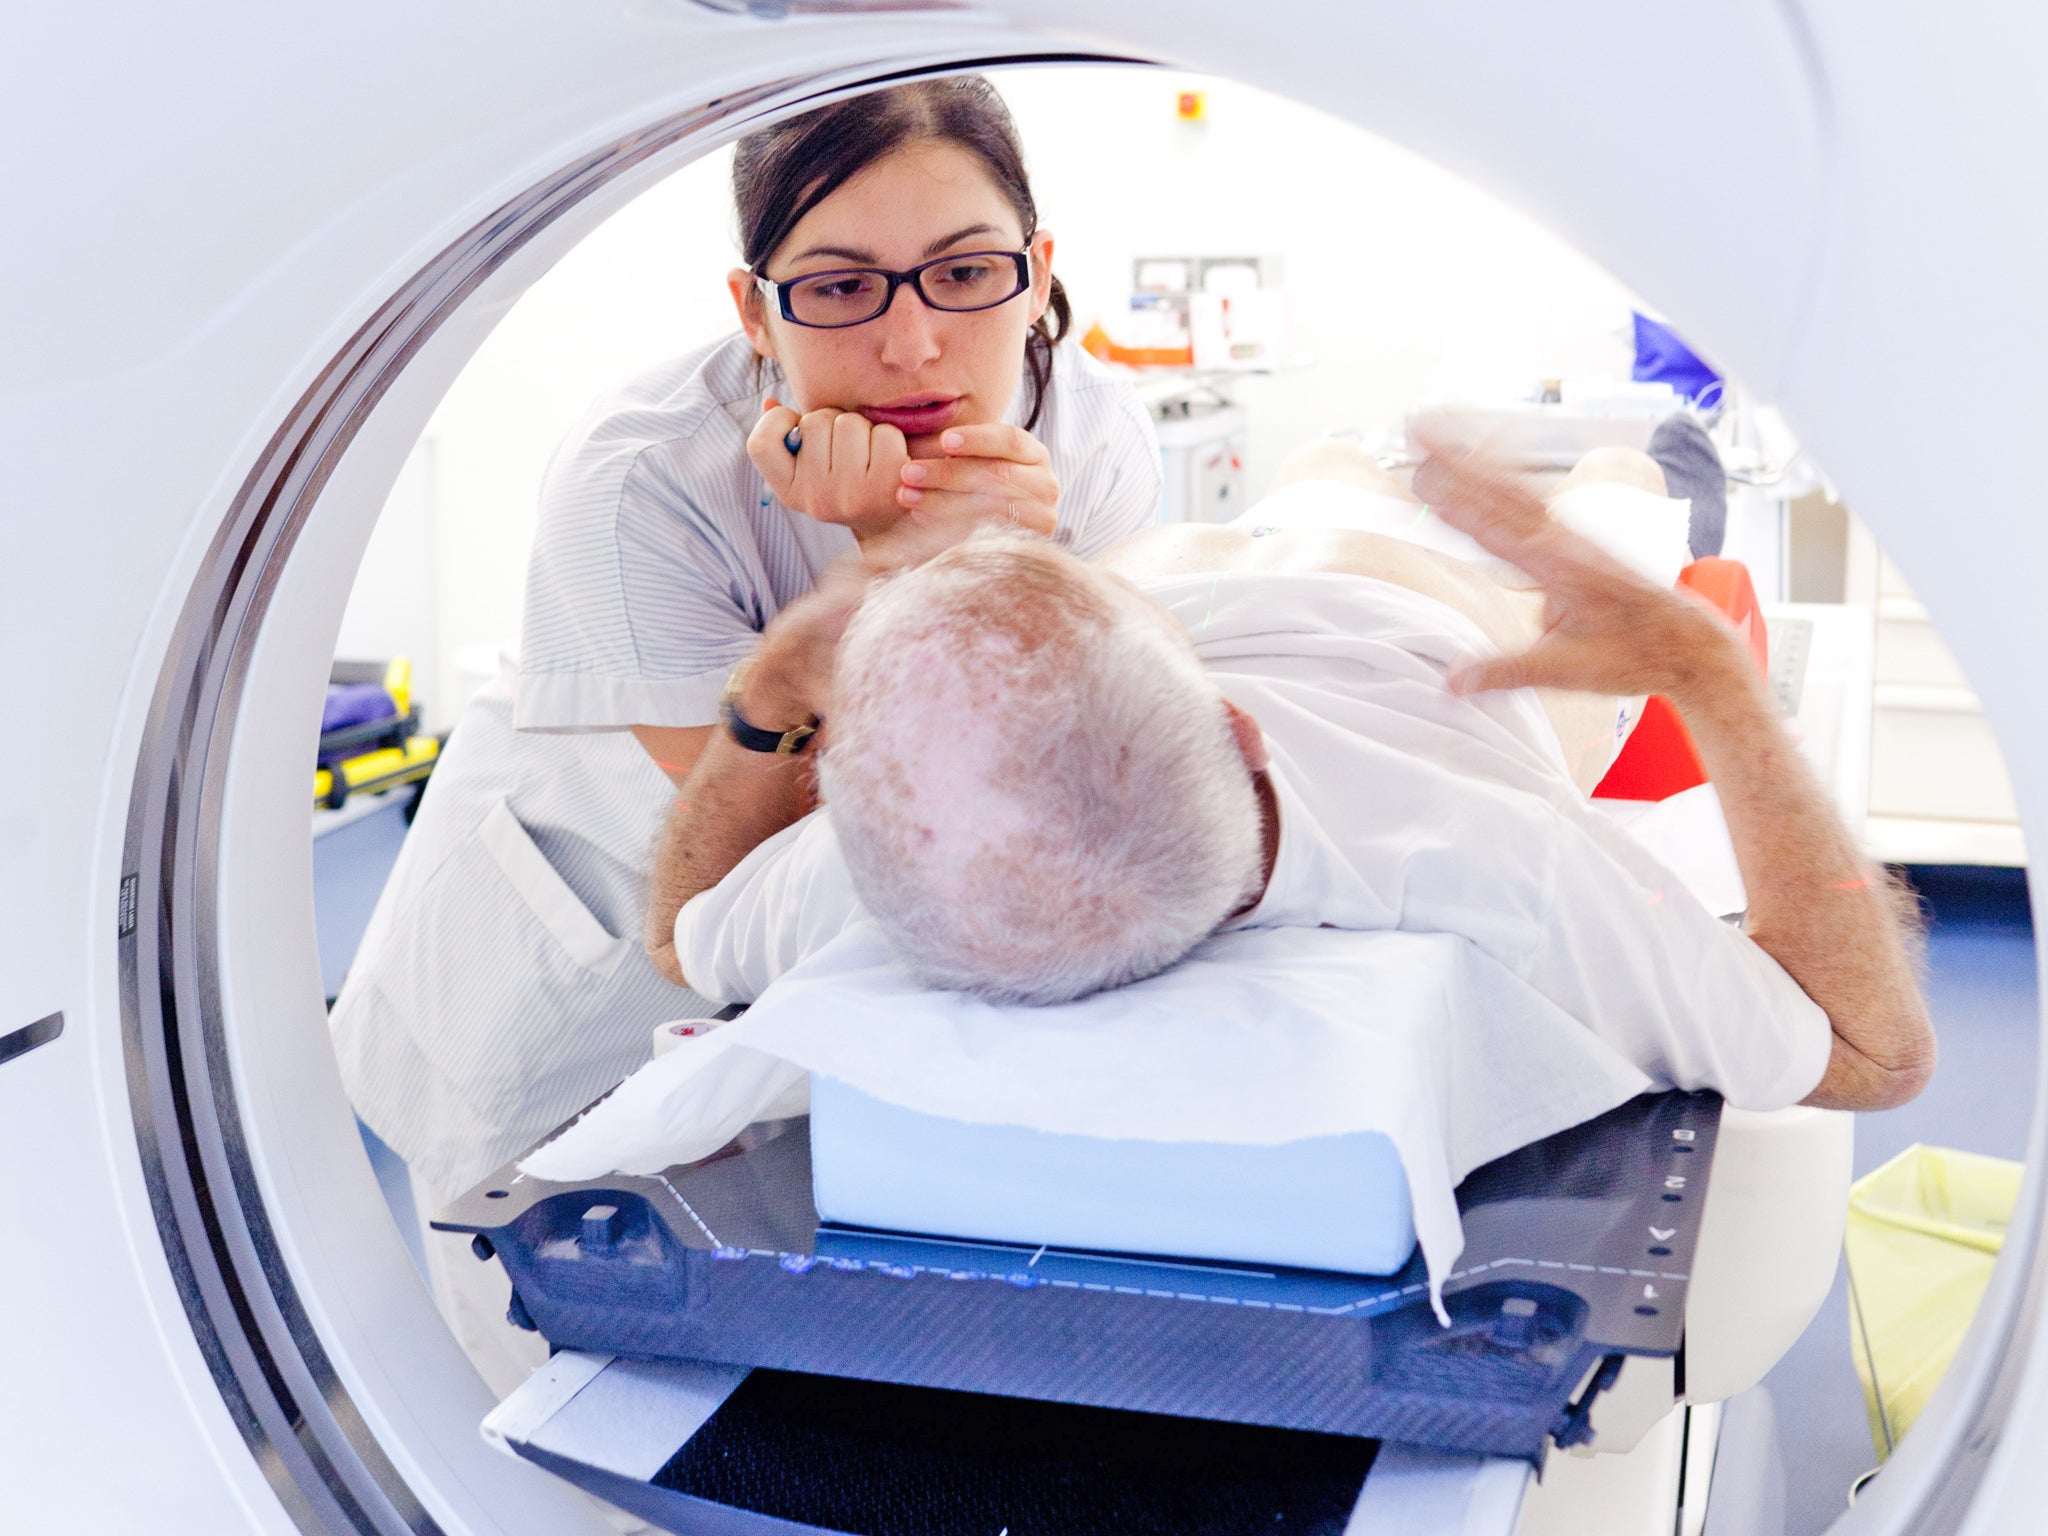 A patient undergoes radiotherapy treatment